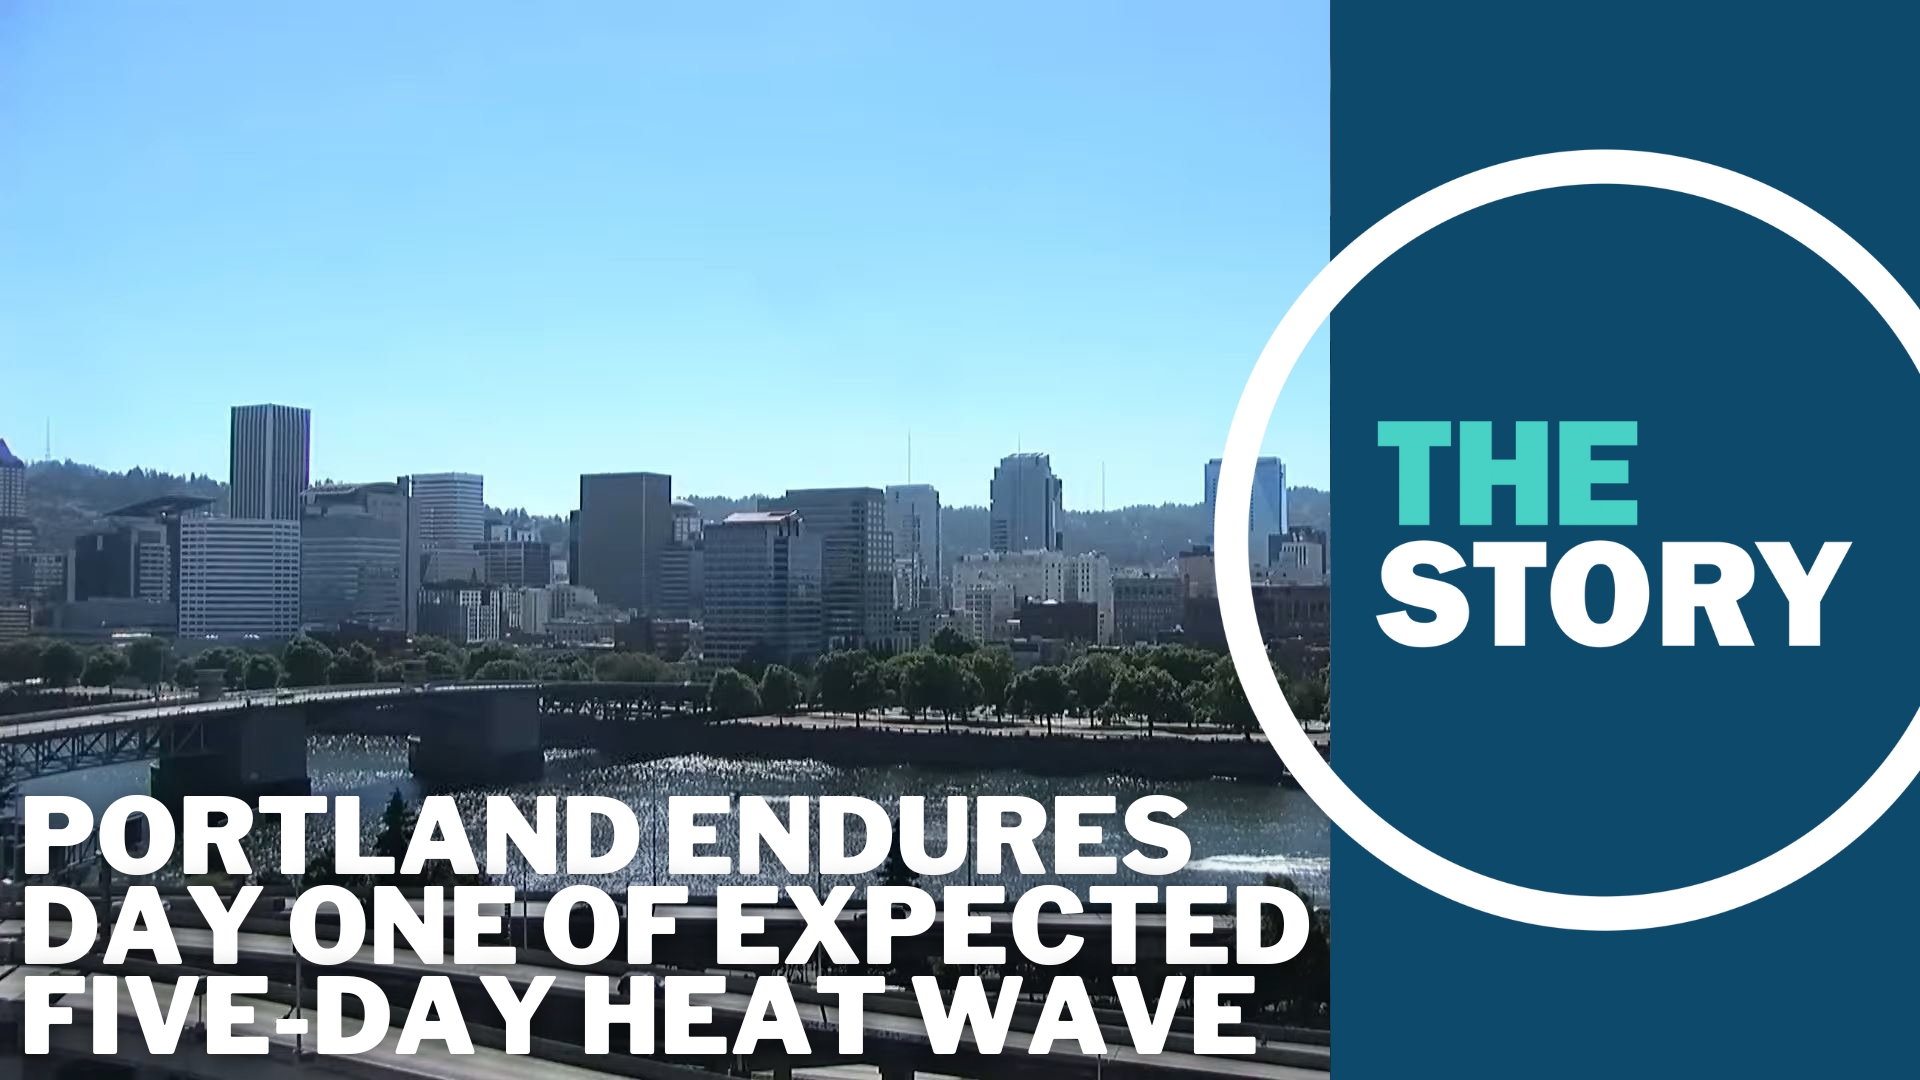 KGW chief meteorologist Matt Zaffino breaks down what’s in store for the Portland region over the next five very hot days.